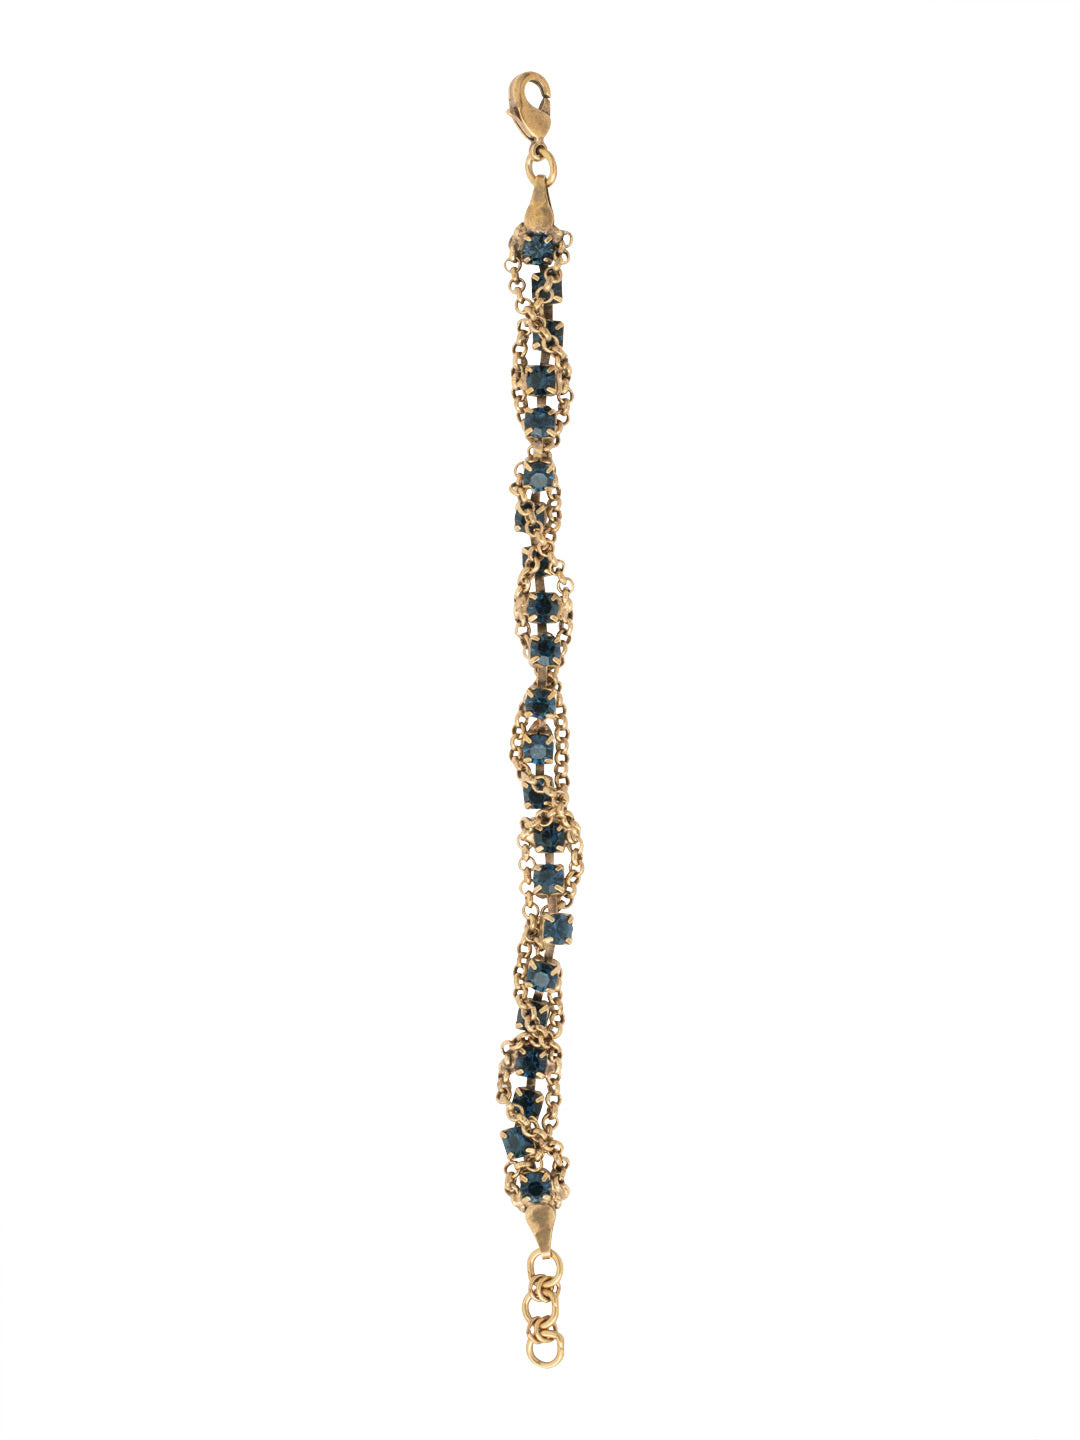 Brandi Classic Tennis Bracelet - BFC60AGVBN - <p>The Brandi Classic Tennis Bracelet features a classic crystal studded line bracelet, elevated with a braided chain design. From Sorrelli's Venice Blue collection in our Antique Gold-tone finish.</p>